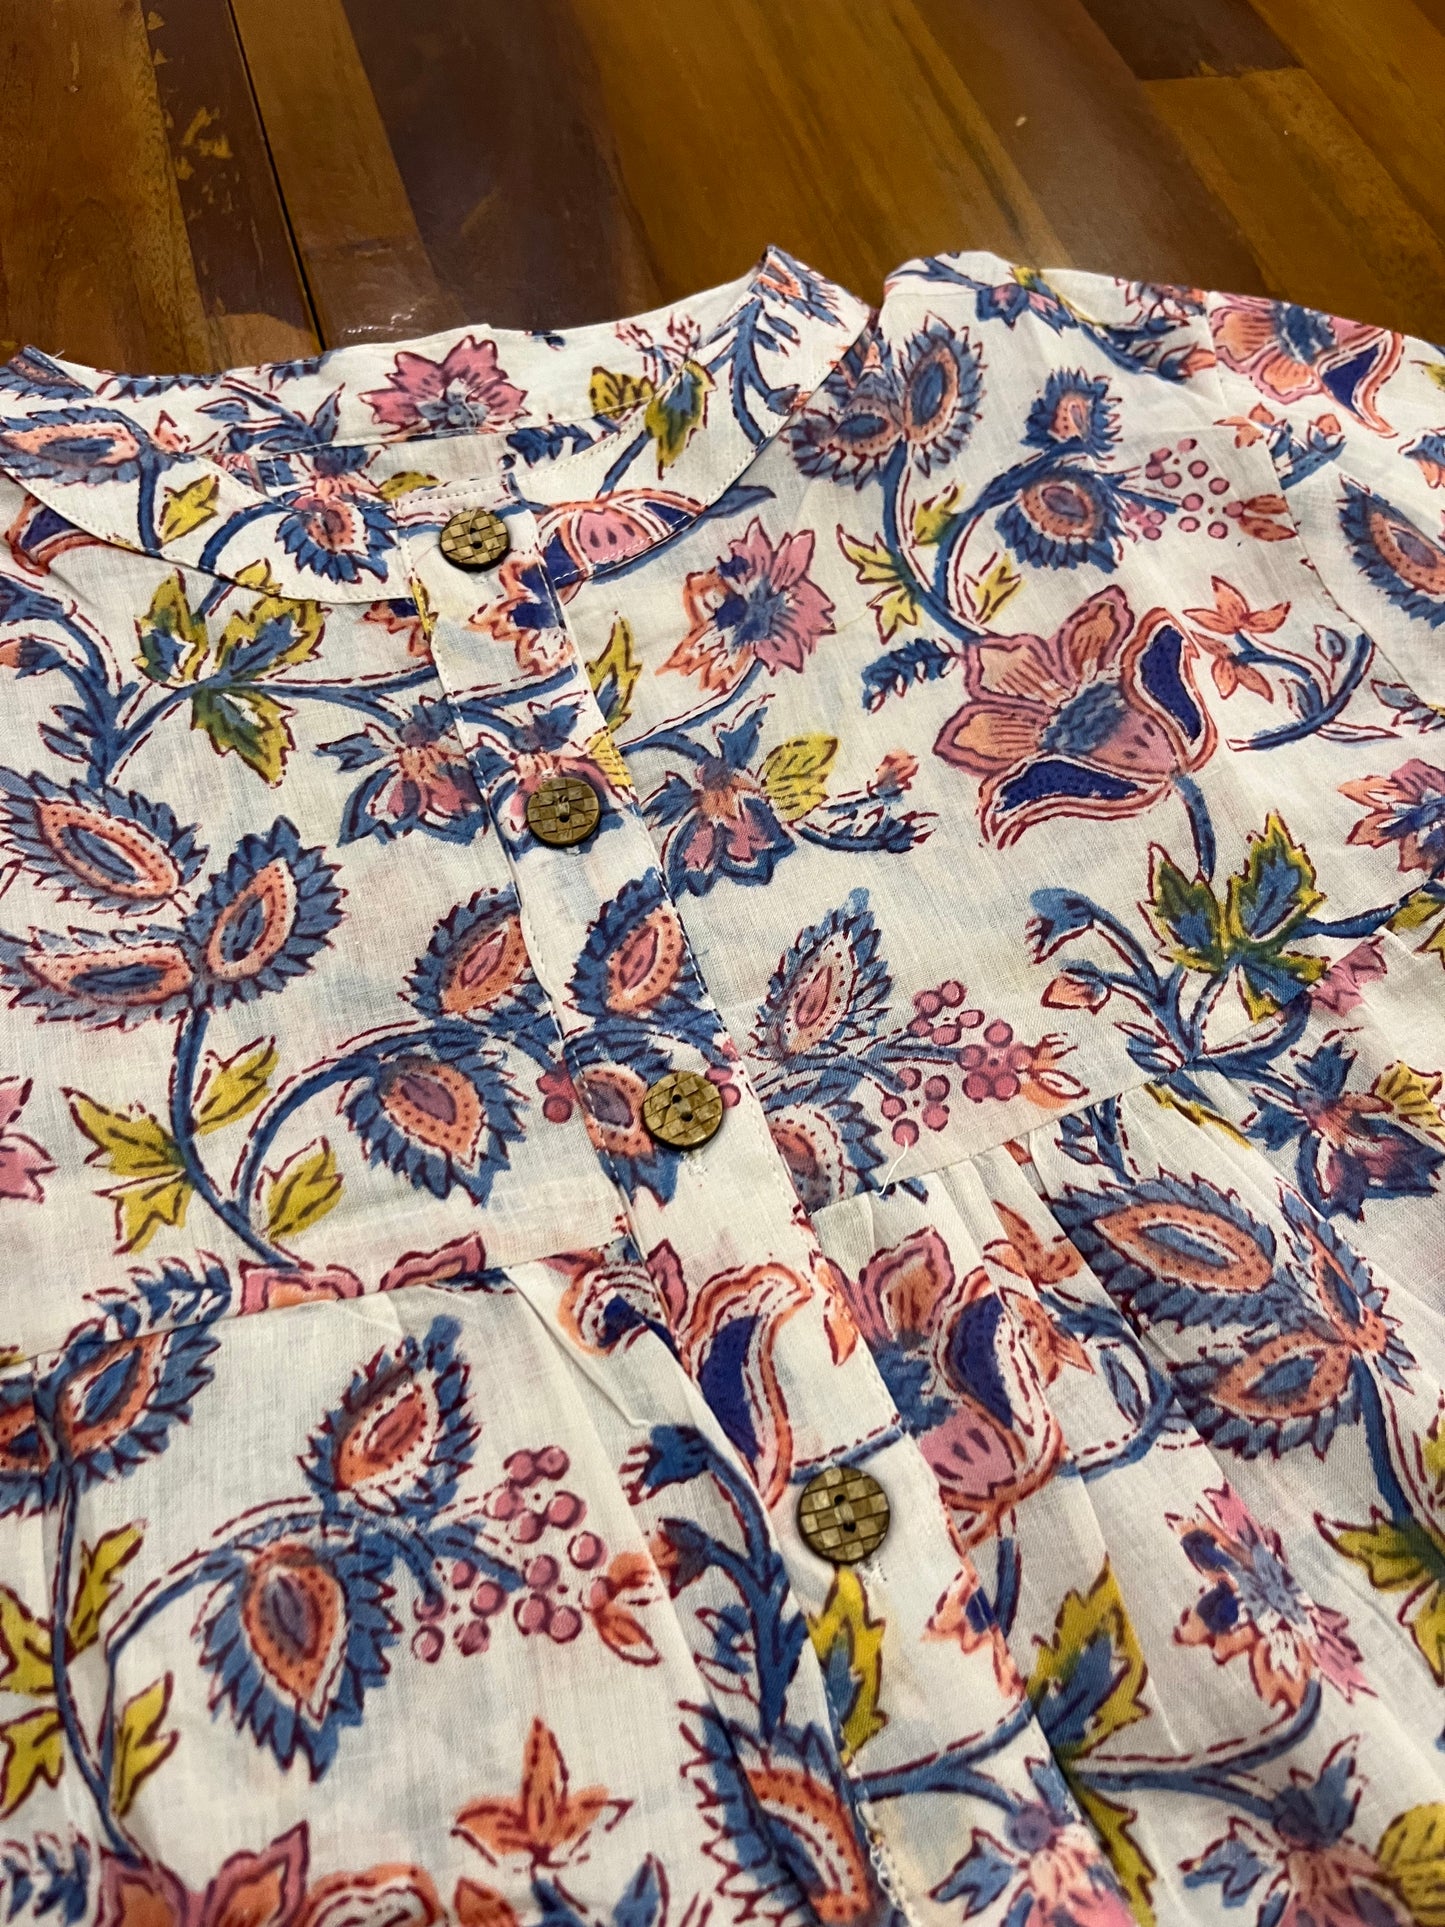 Southloom Jaipur Cotton Pink and Blue Floral Hand Block Printed White Top (Half Sleeves)